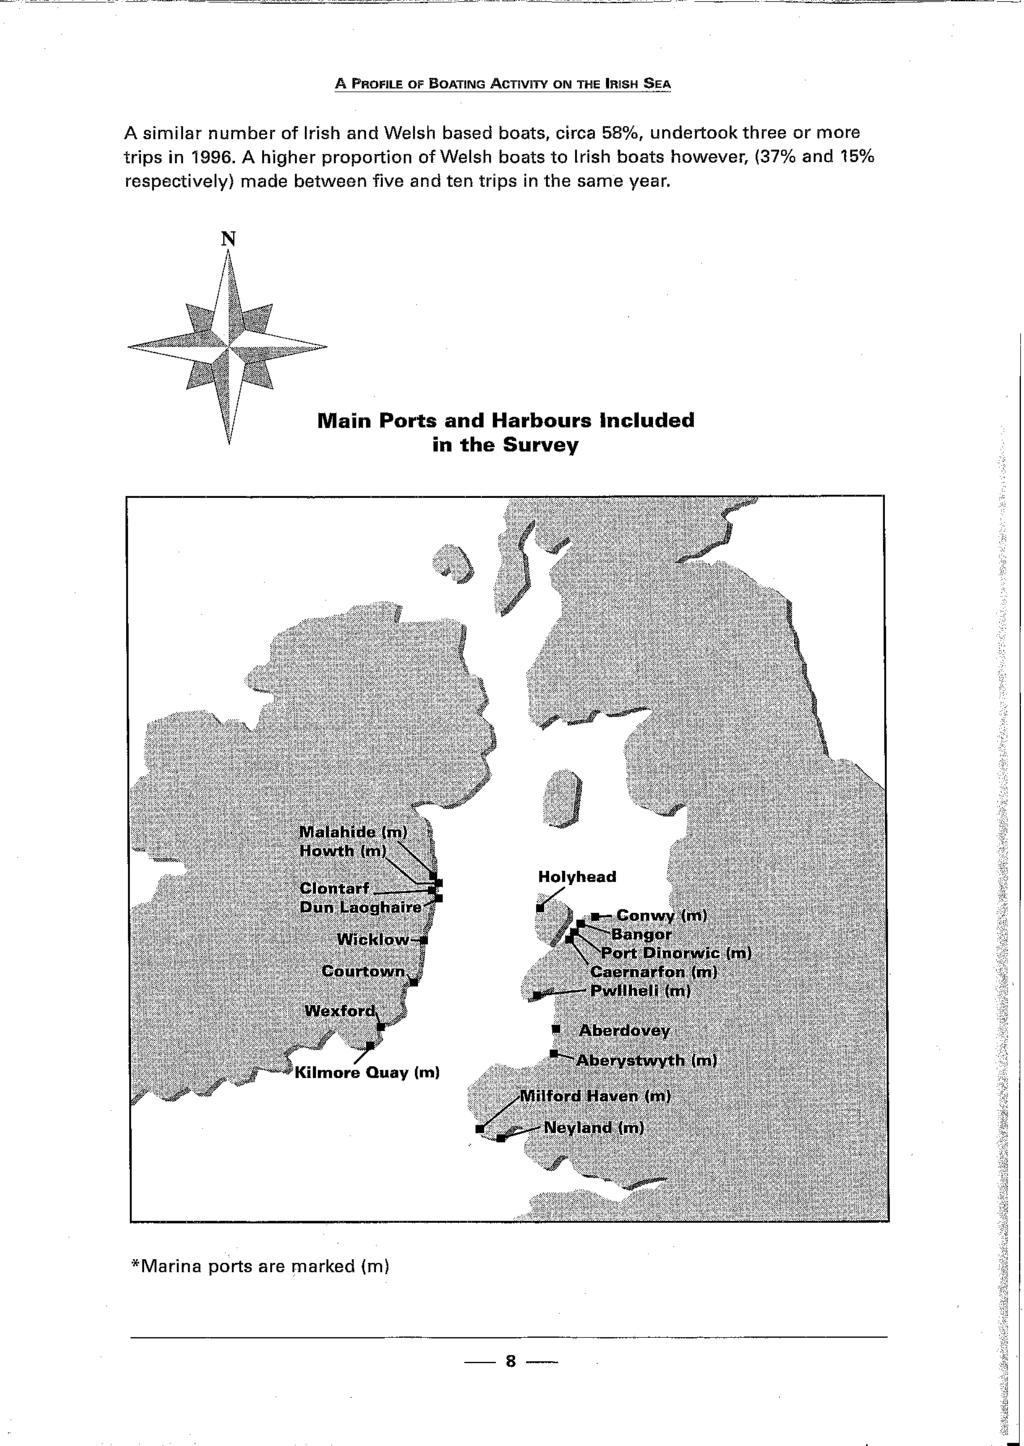 A PROFILE OF BOATING ACTIVITY ON THE IRISH SEA A similar number of lrish and Welsh based boats, circa 58% undertook three or more trips in 1996.